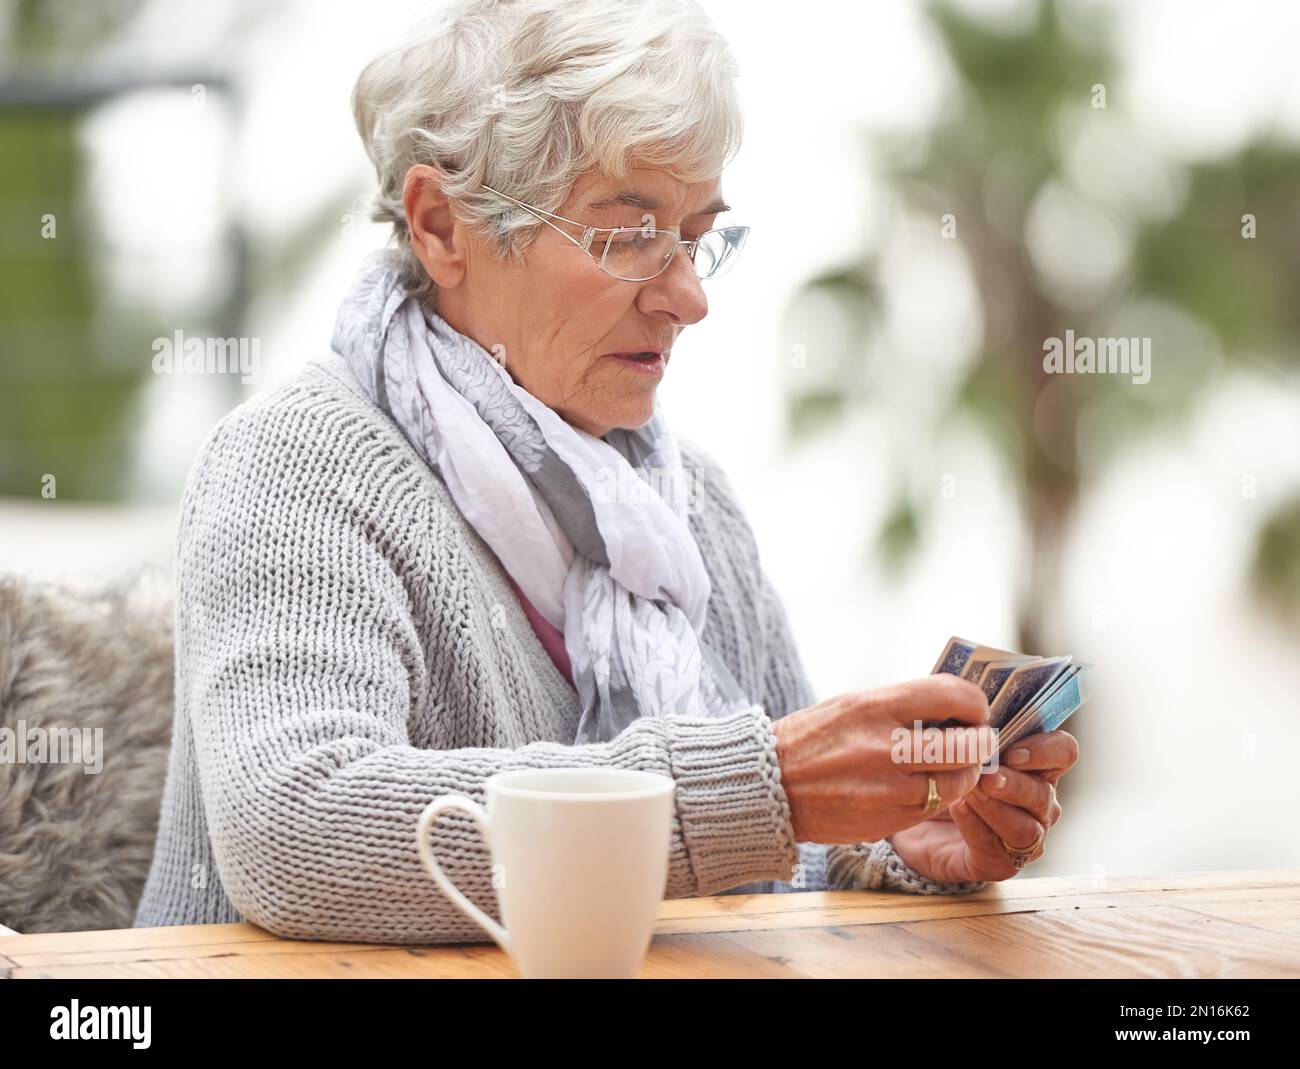 Dont hate the player, hate the game. a senior woman holding a stack of cards in her hand. Stock Photo